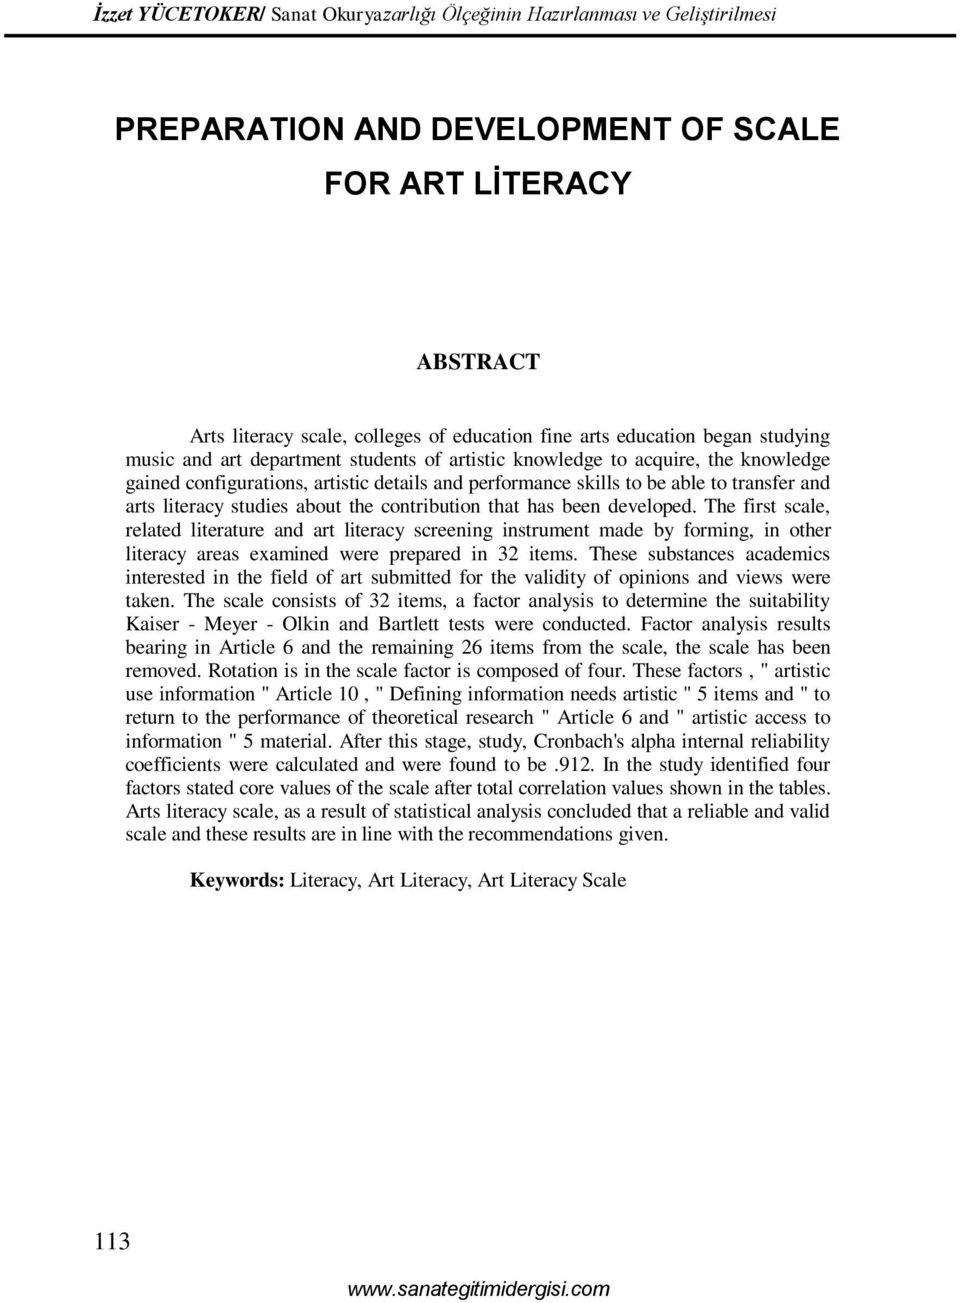 The first scale, related literature and art literacy screening instrument made by forming, in other literacy areas examined were prepared in 32 items.